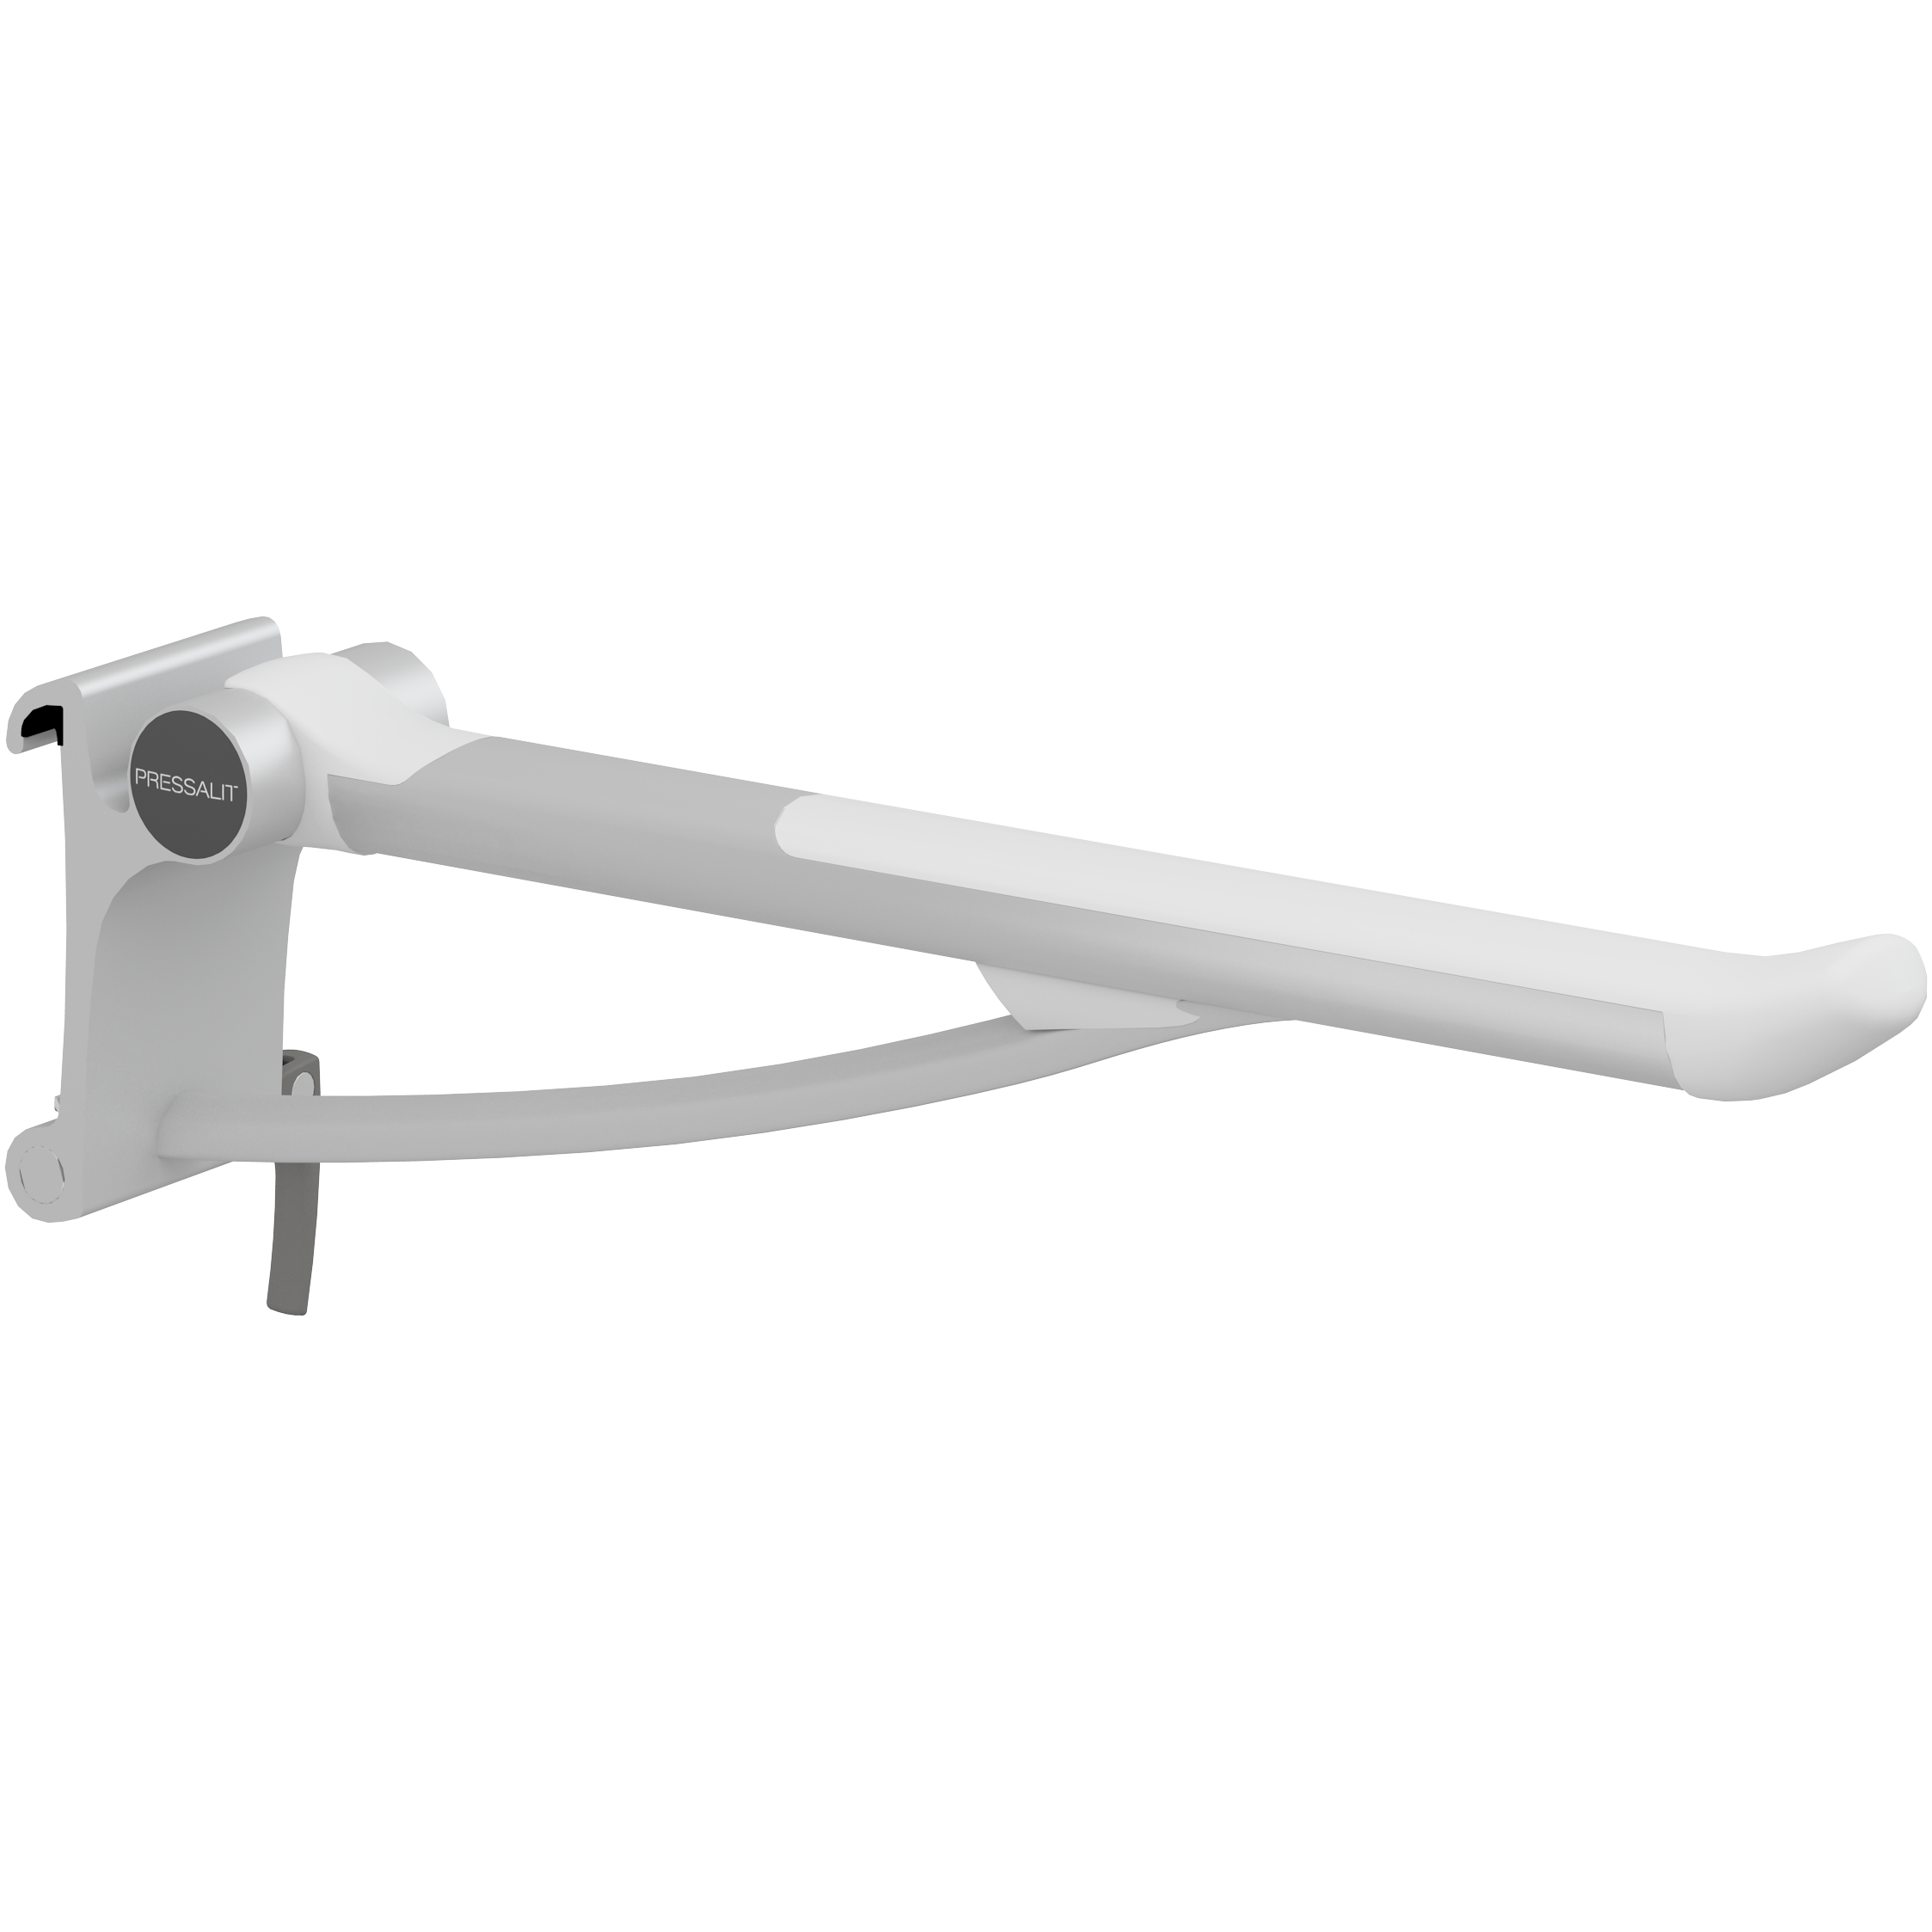 PLUS fold down grab bar with integrated counter-balance, 27.6'', right hand operated